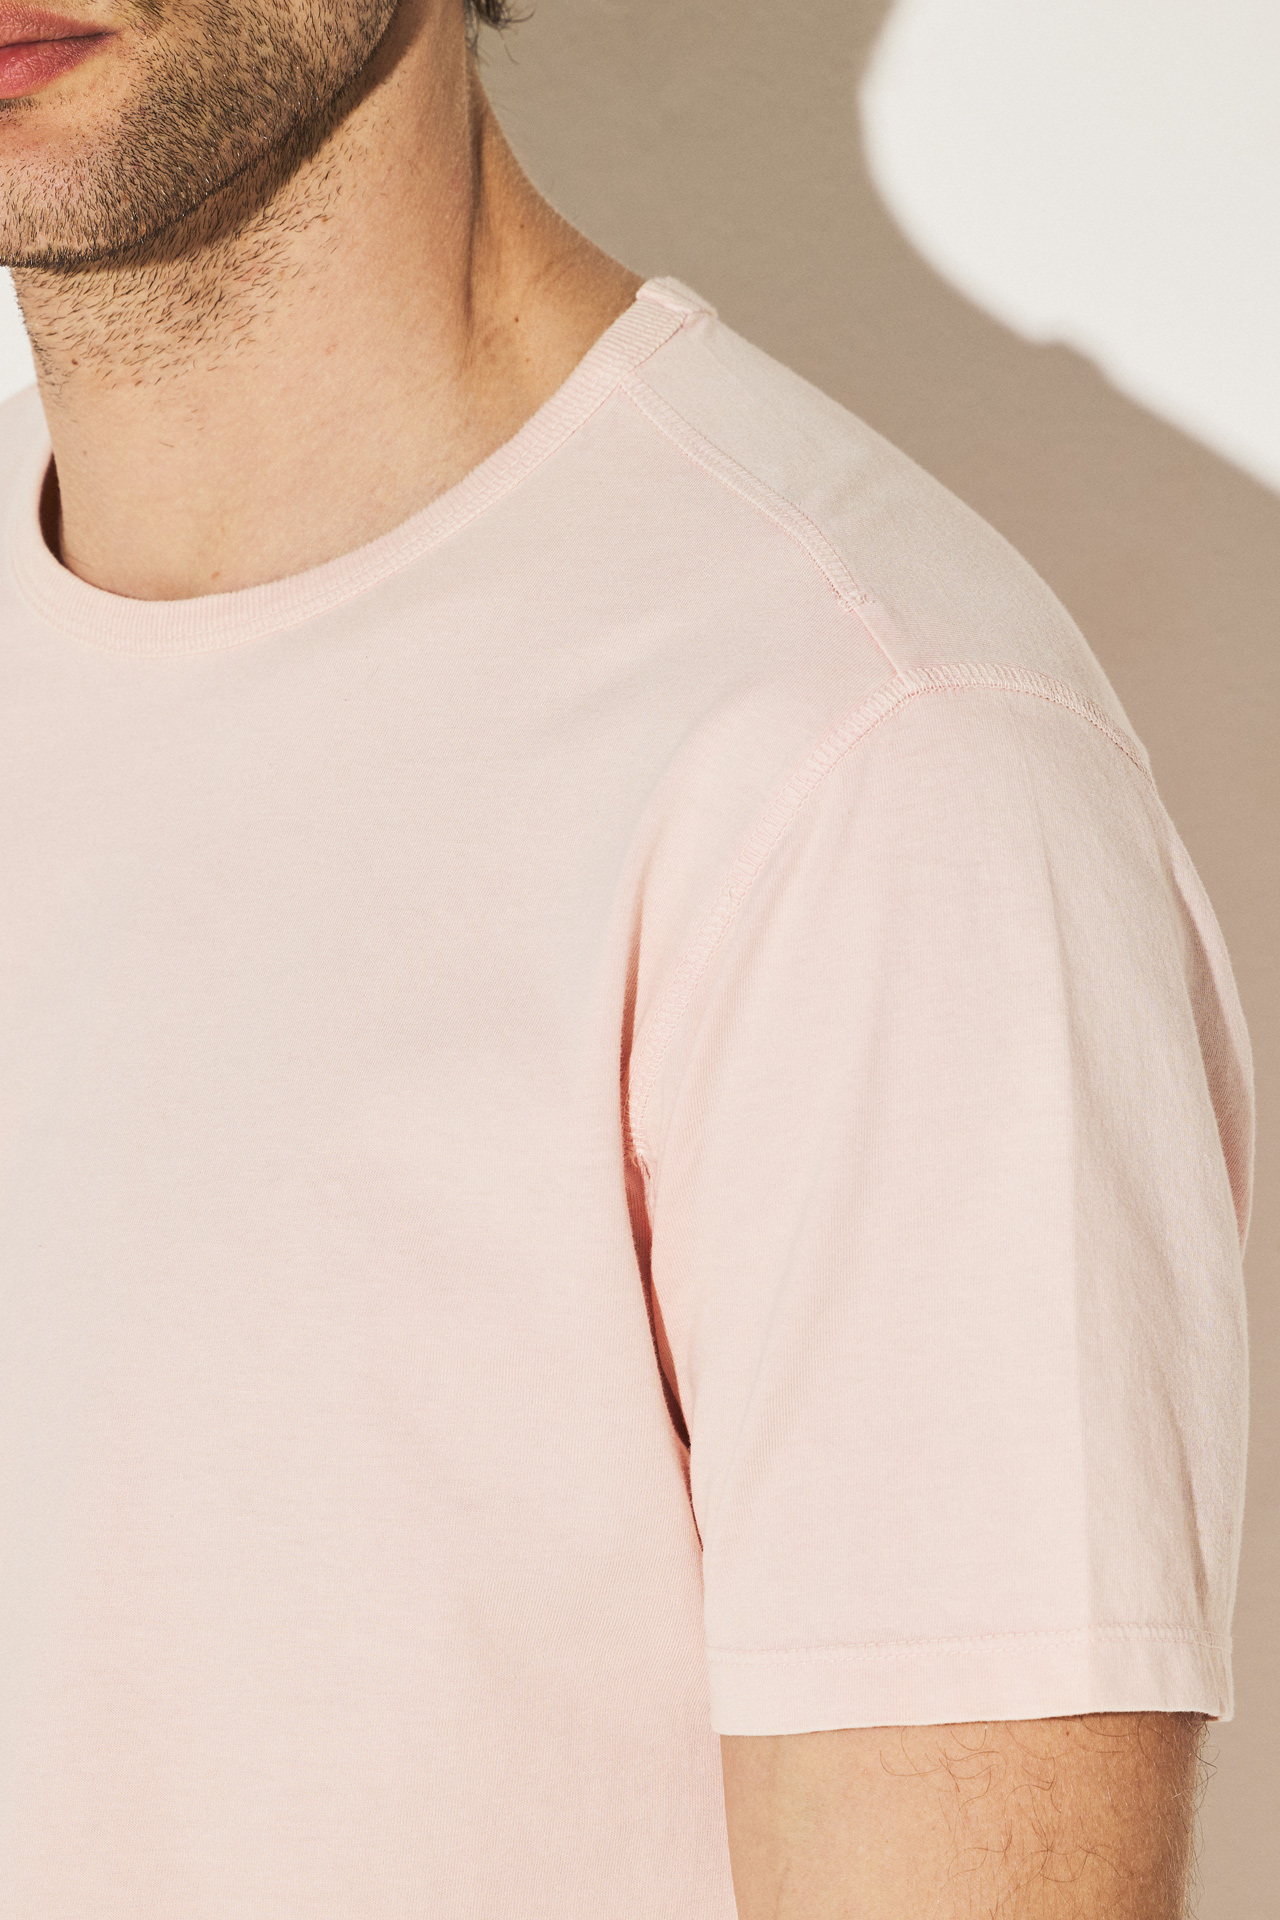 ACID COVER STITCHED DETAIL TEE